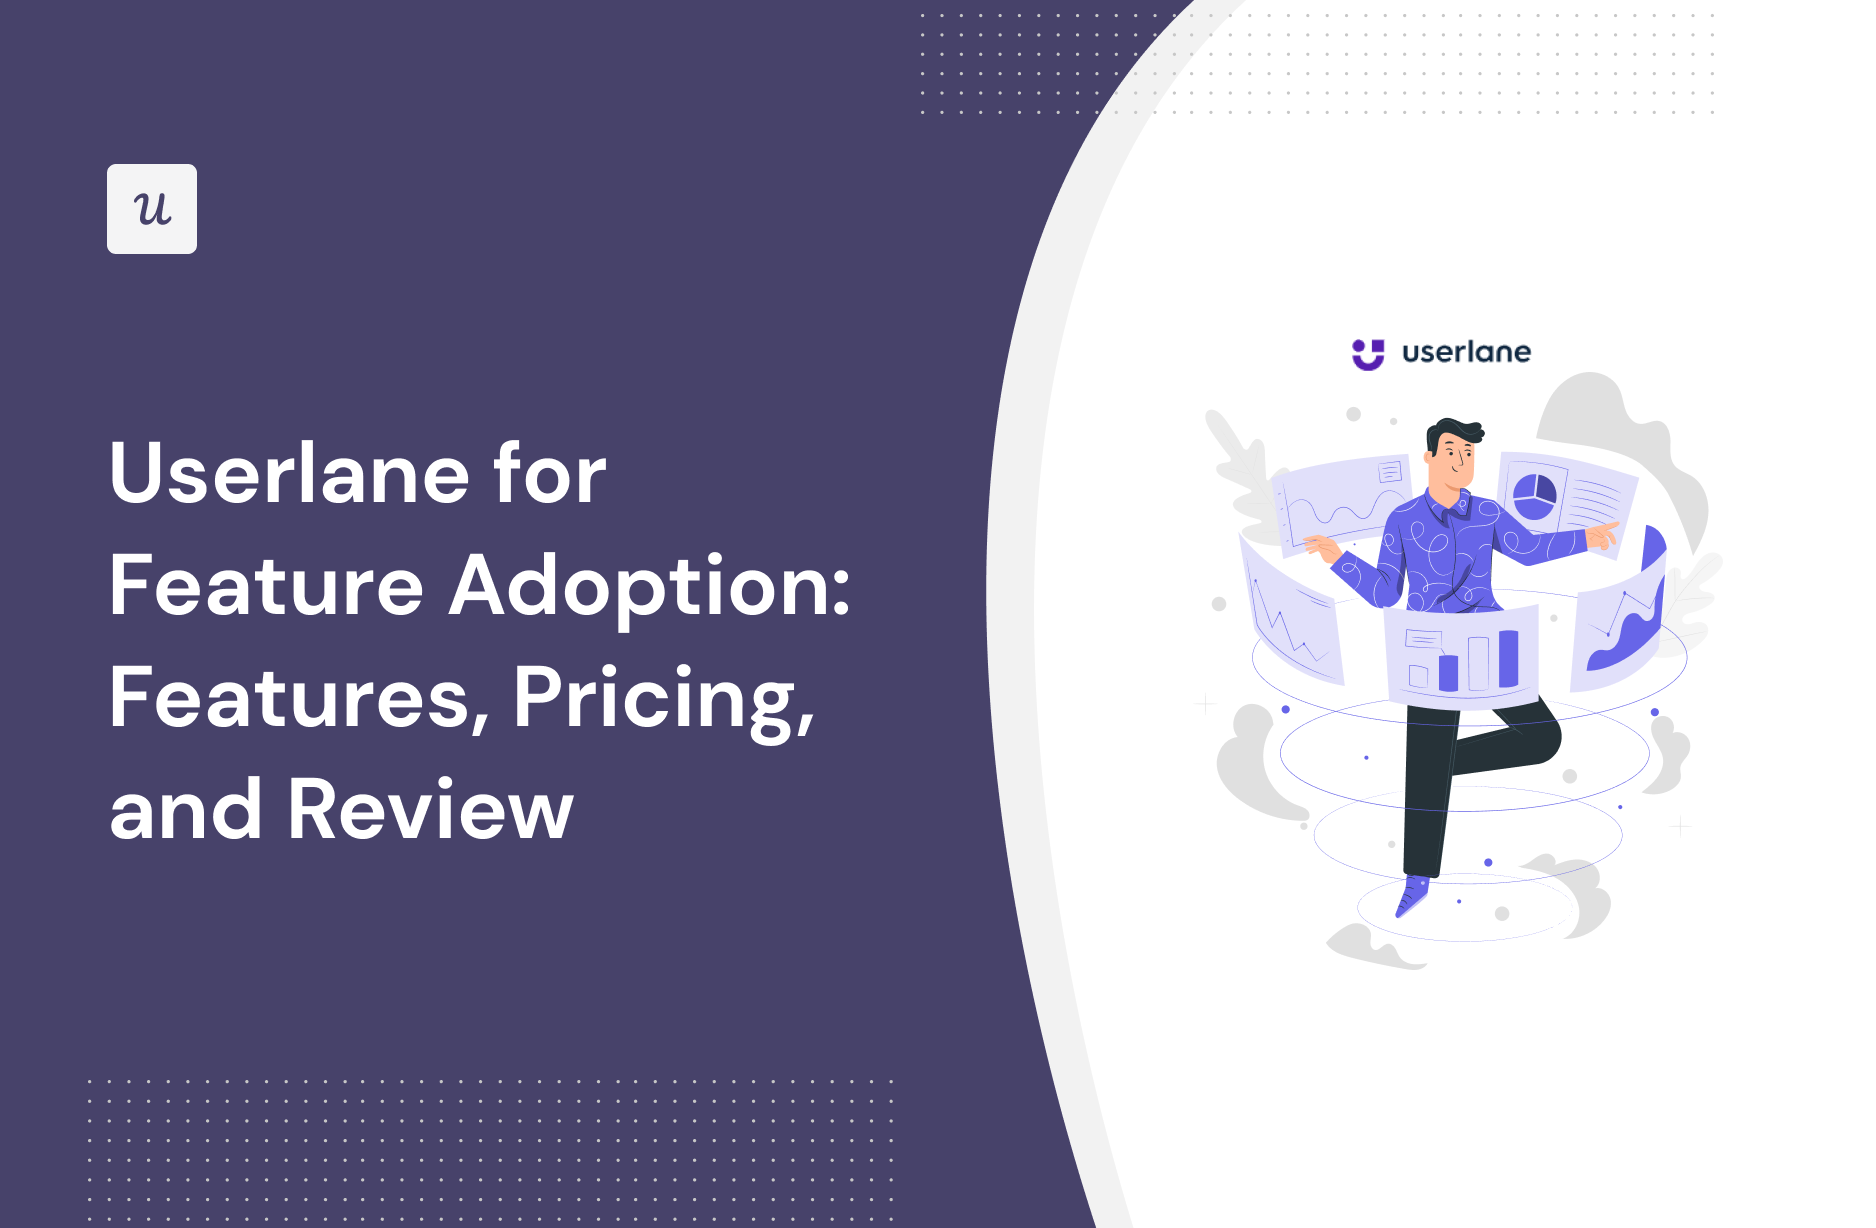 Userlane for Feature Adoption: Features, Pricing, and Review